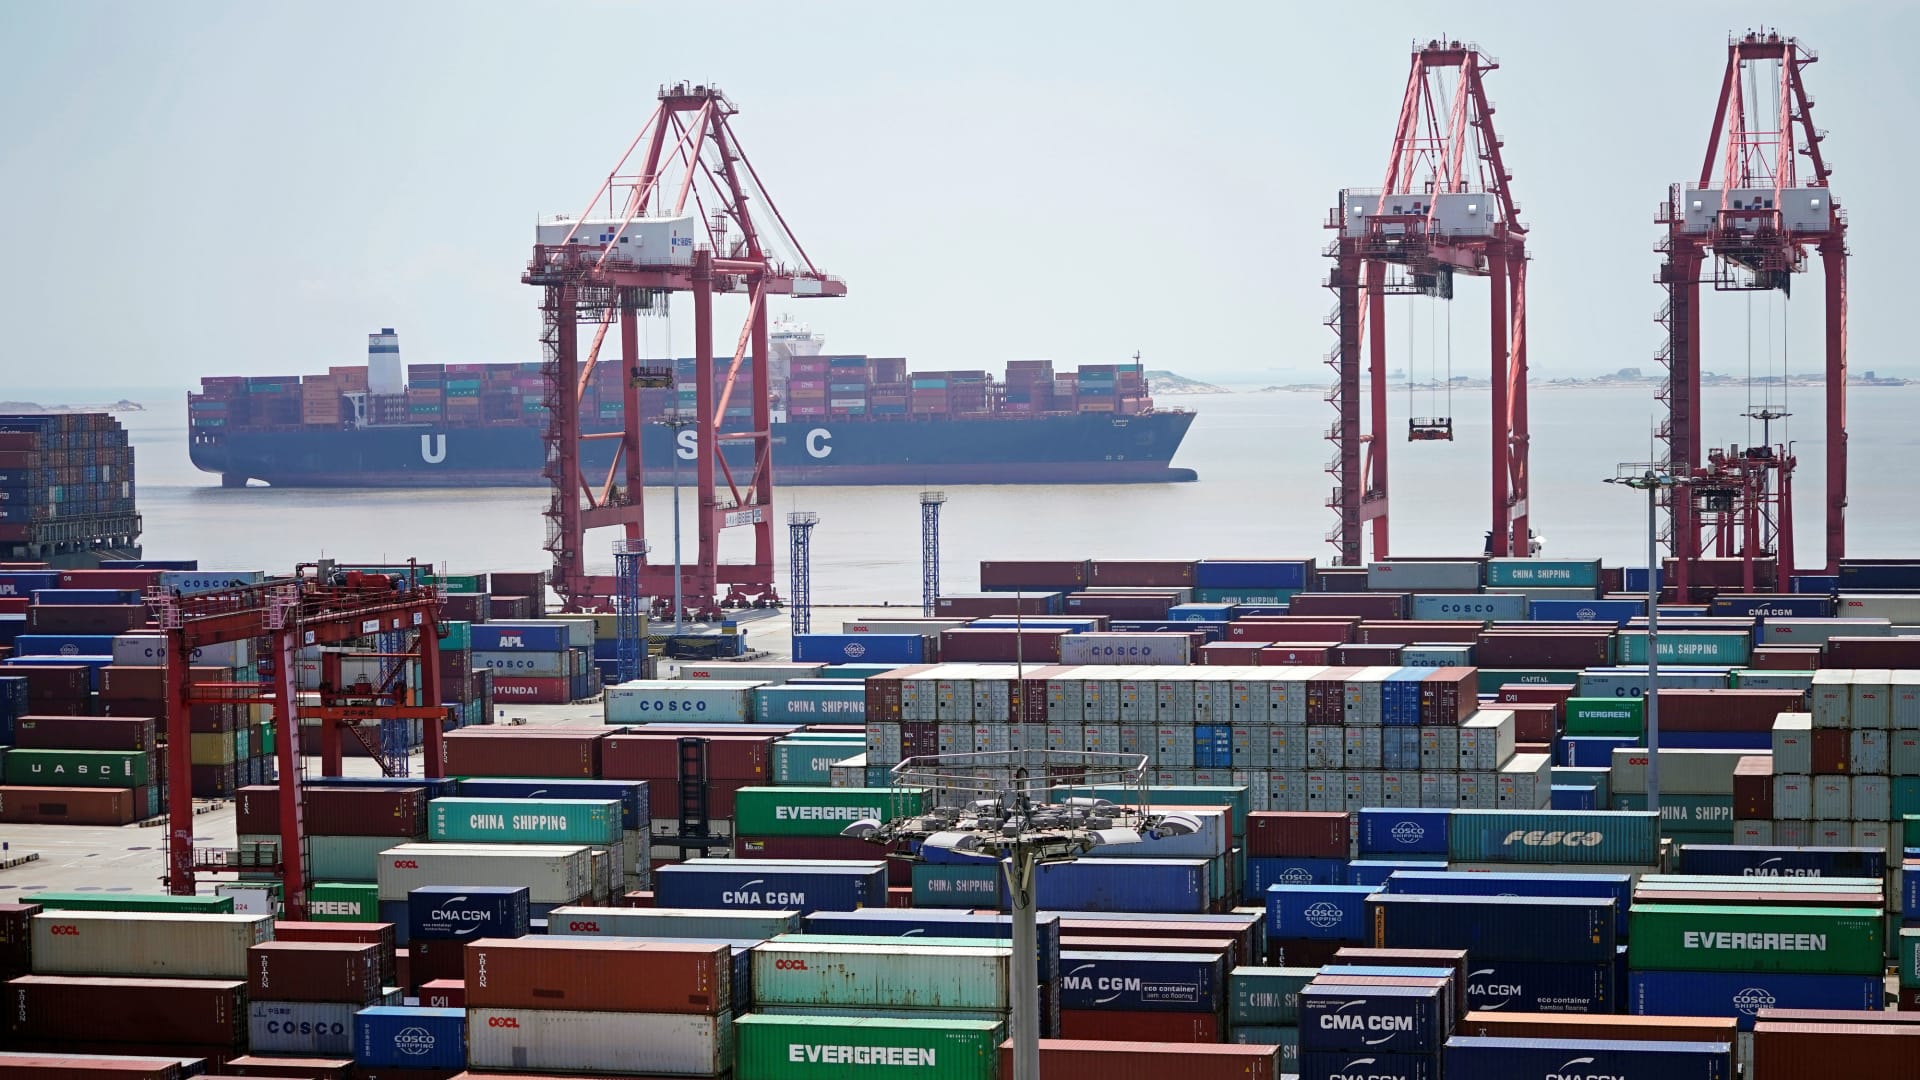 China's imports jump 8.4% in April, exceeding expectations as purchases from the U.S. grow